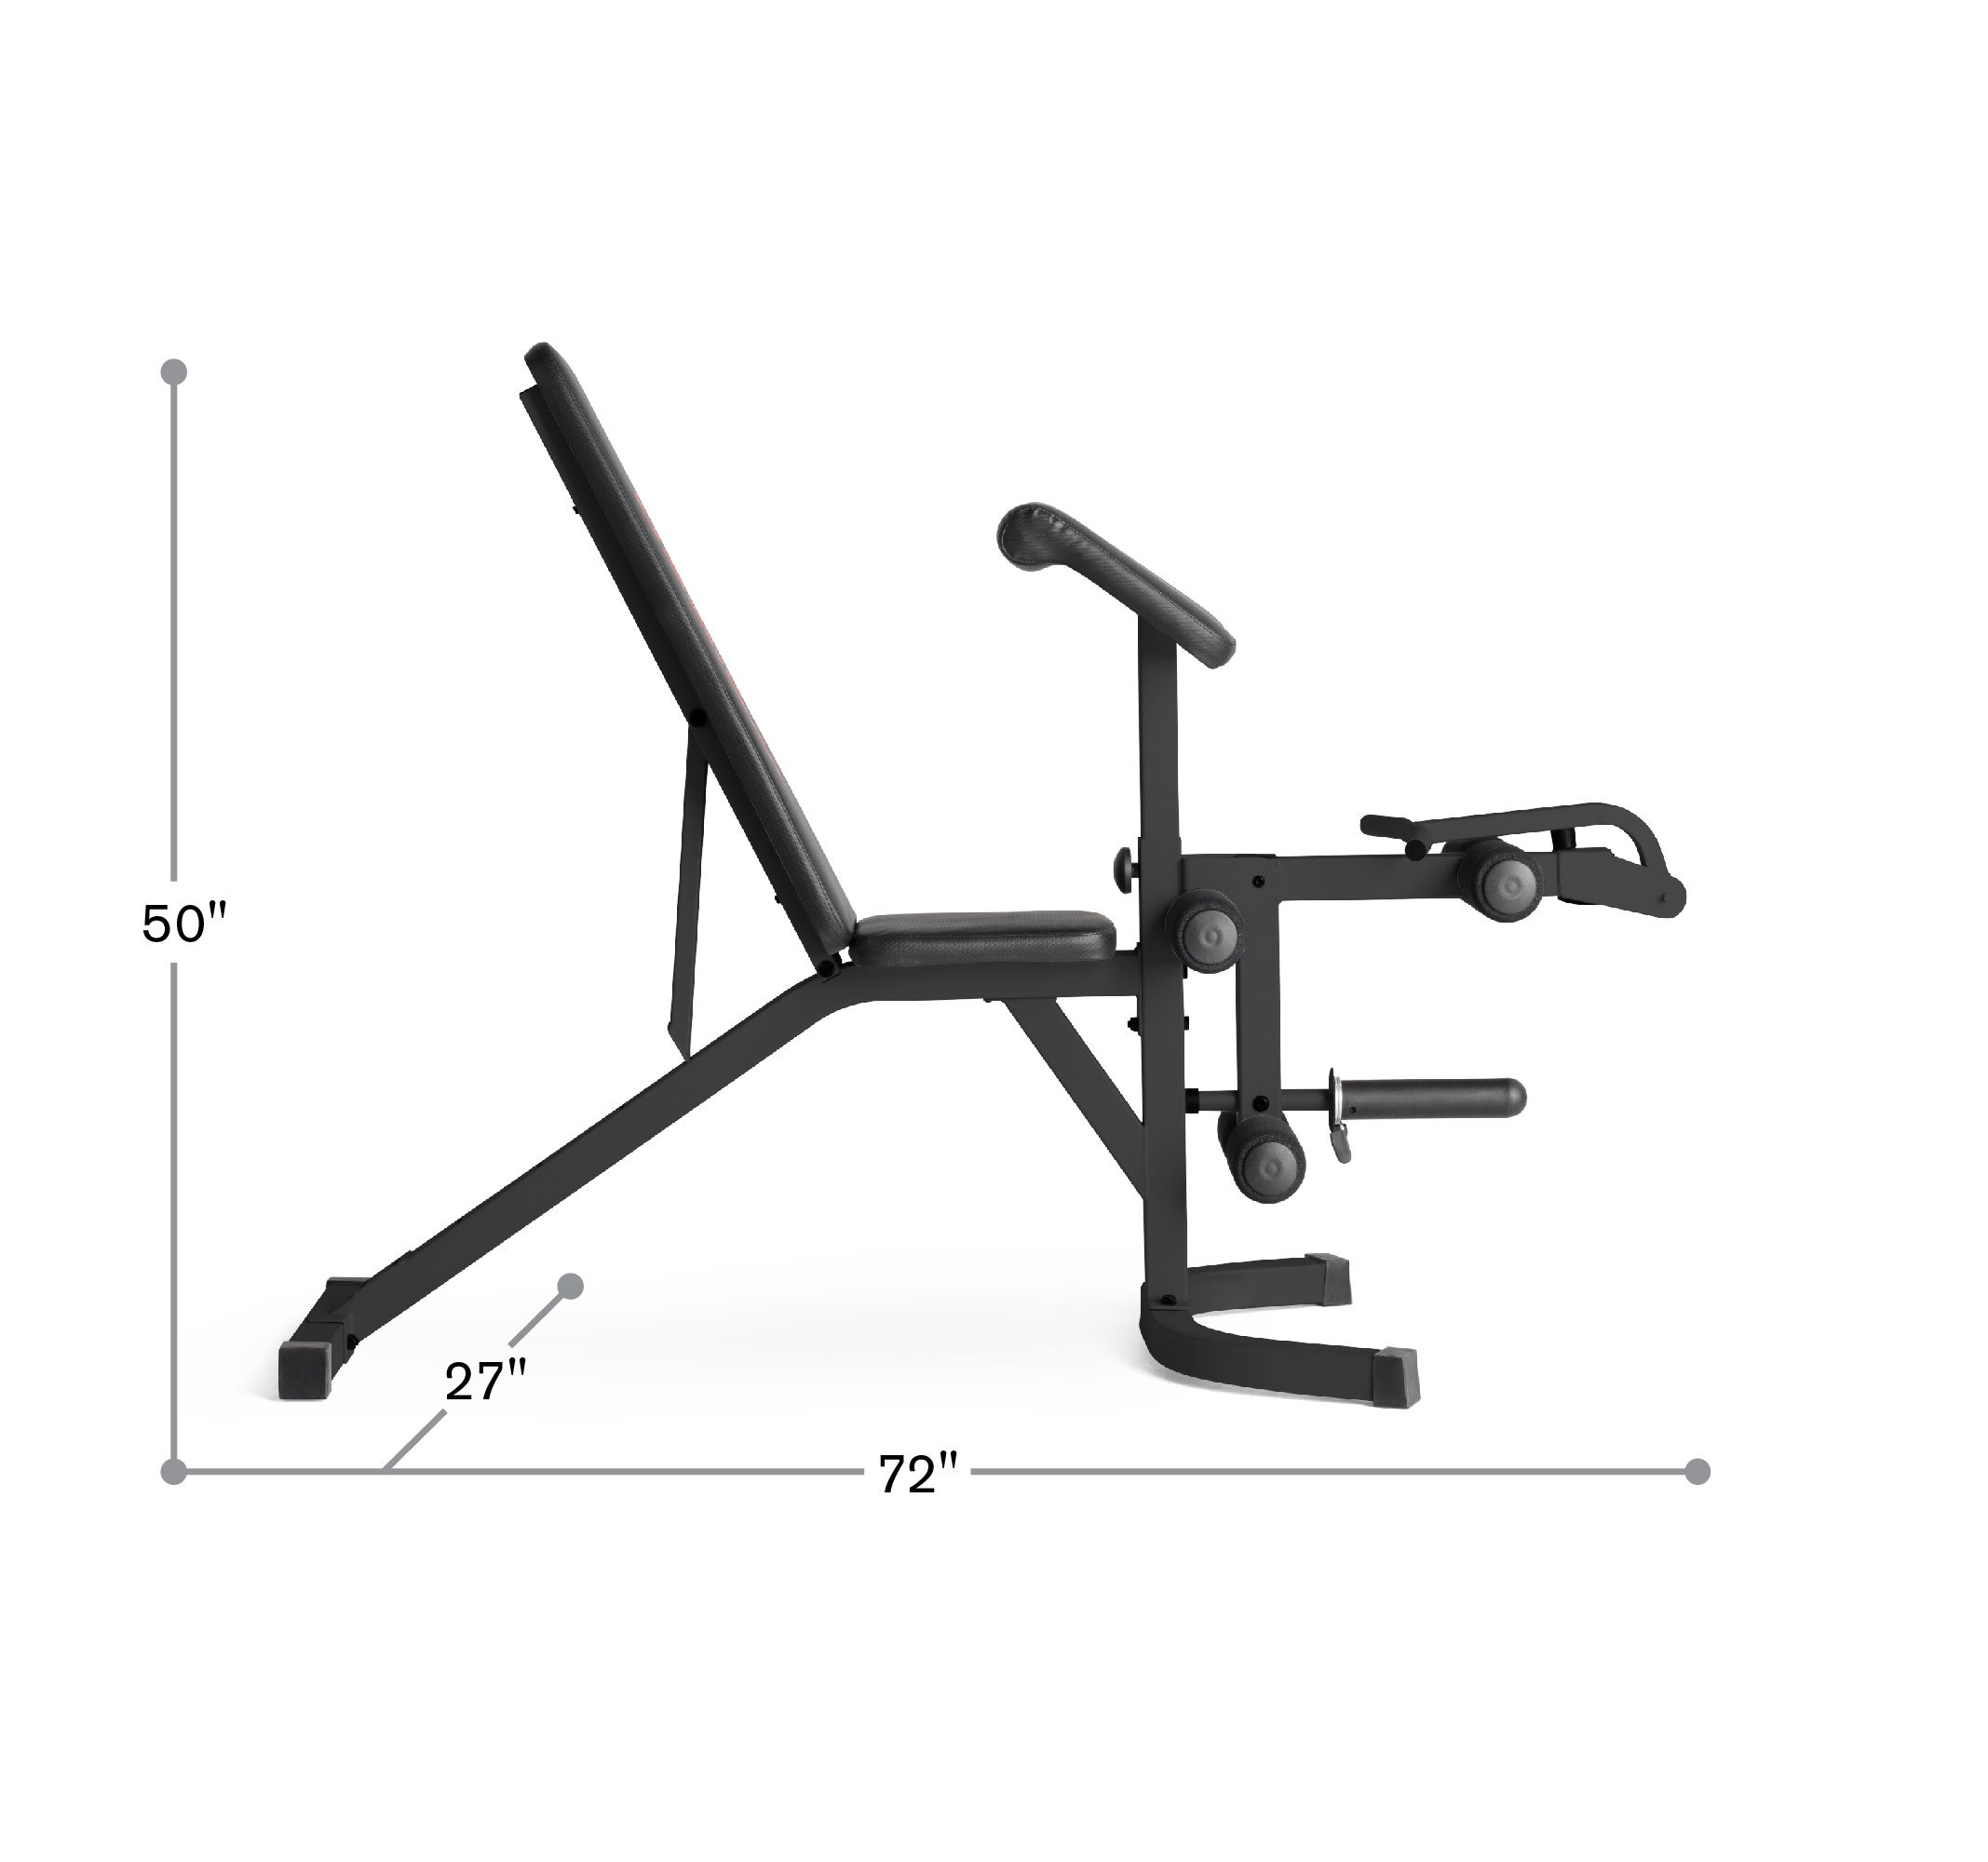 Weider Attack Olympic Utility Bench with 610 Lb. Total Weight Capacity - image 3 of 34